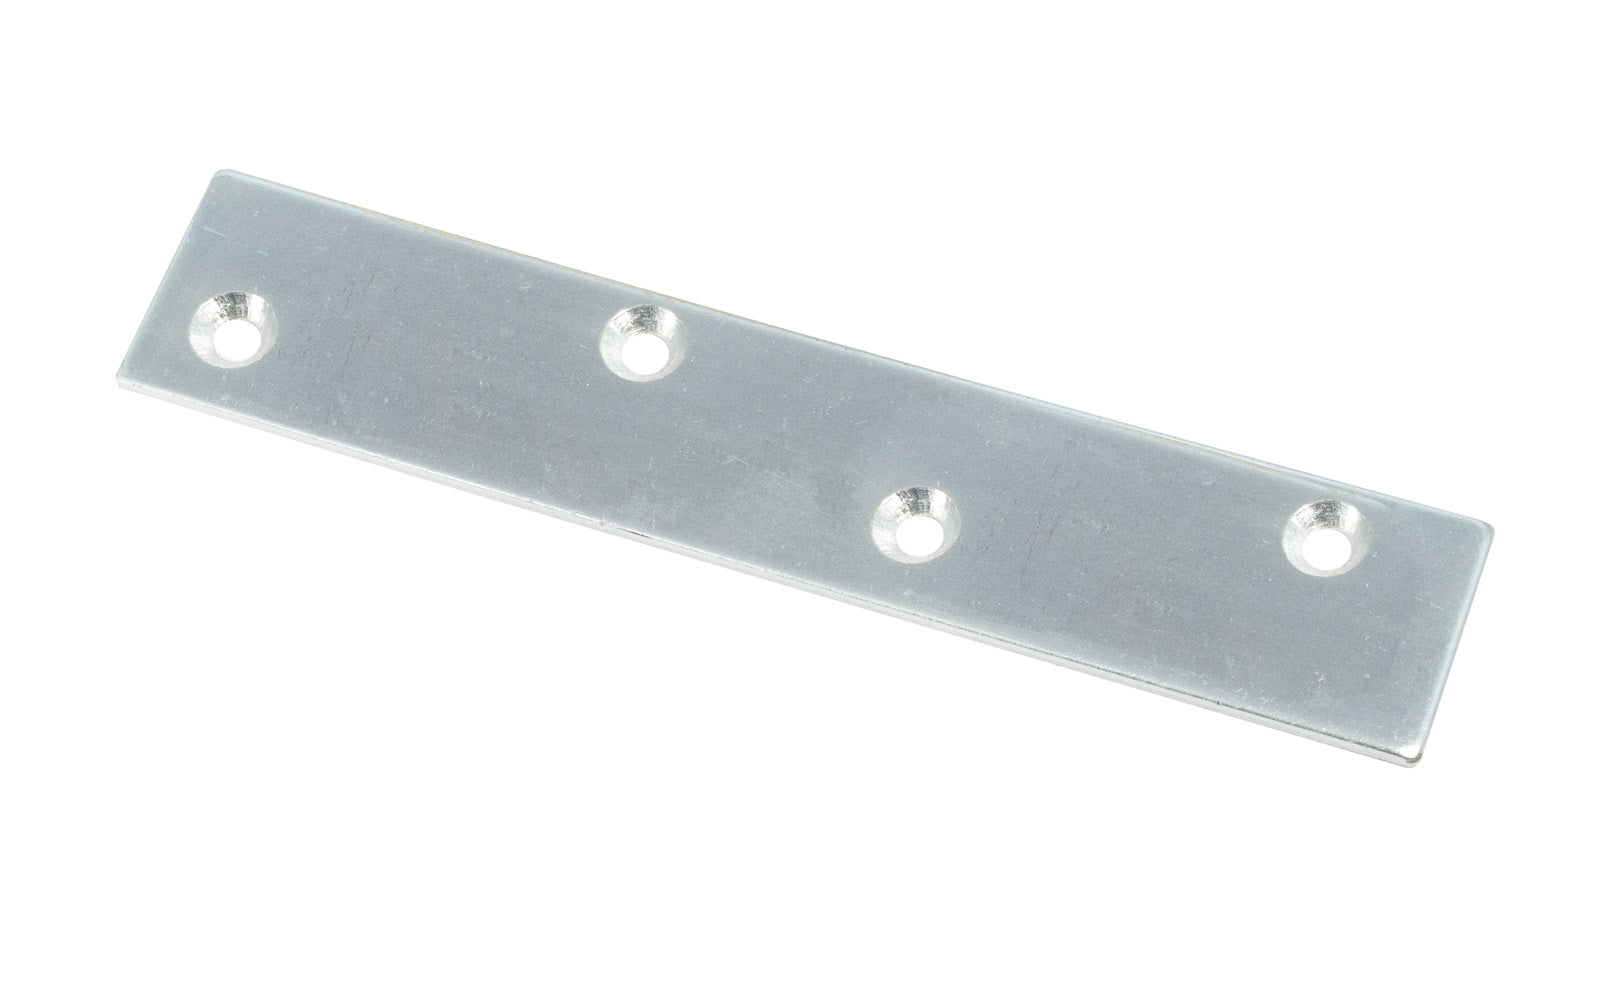 These flat mending plate irons are designed for furniture, cabinets, shelving support, etc. Allows for quick & easy repair of items in the workshop, home, & other applications. Made of steel material with a zinc plated finish. Countersunk holes. Sold as singles, or bulk box of (20) mending braces. 5